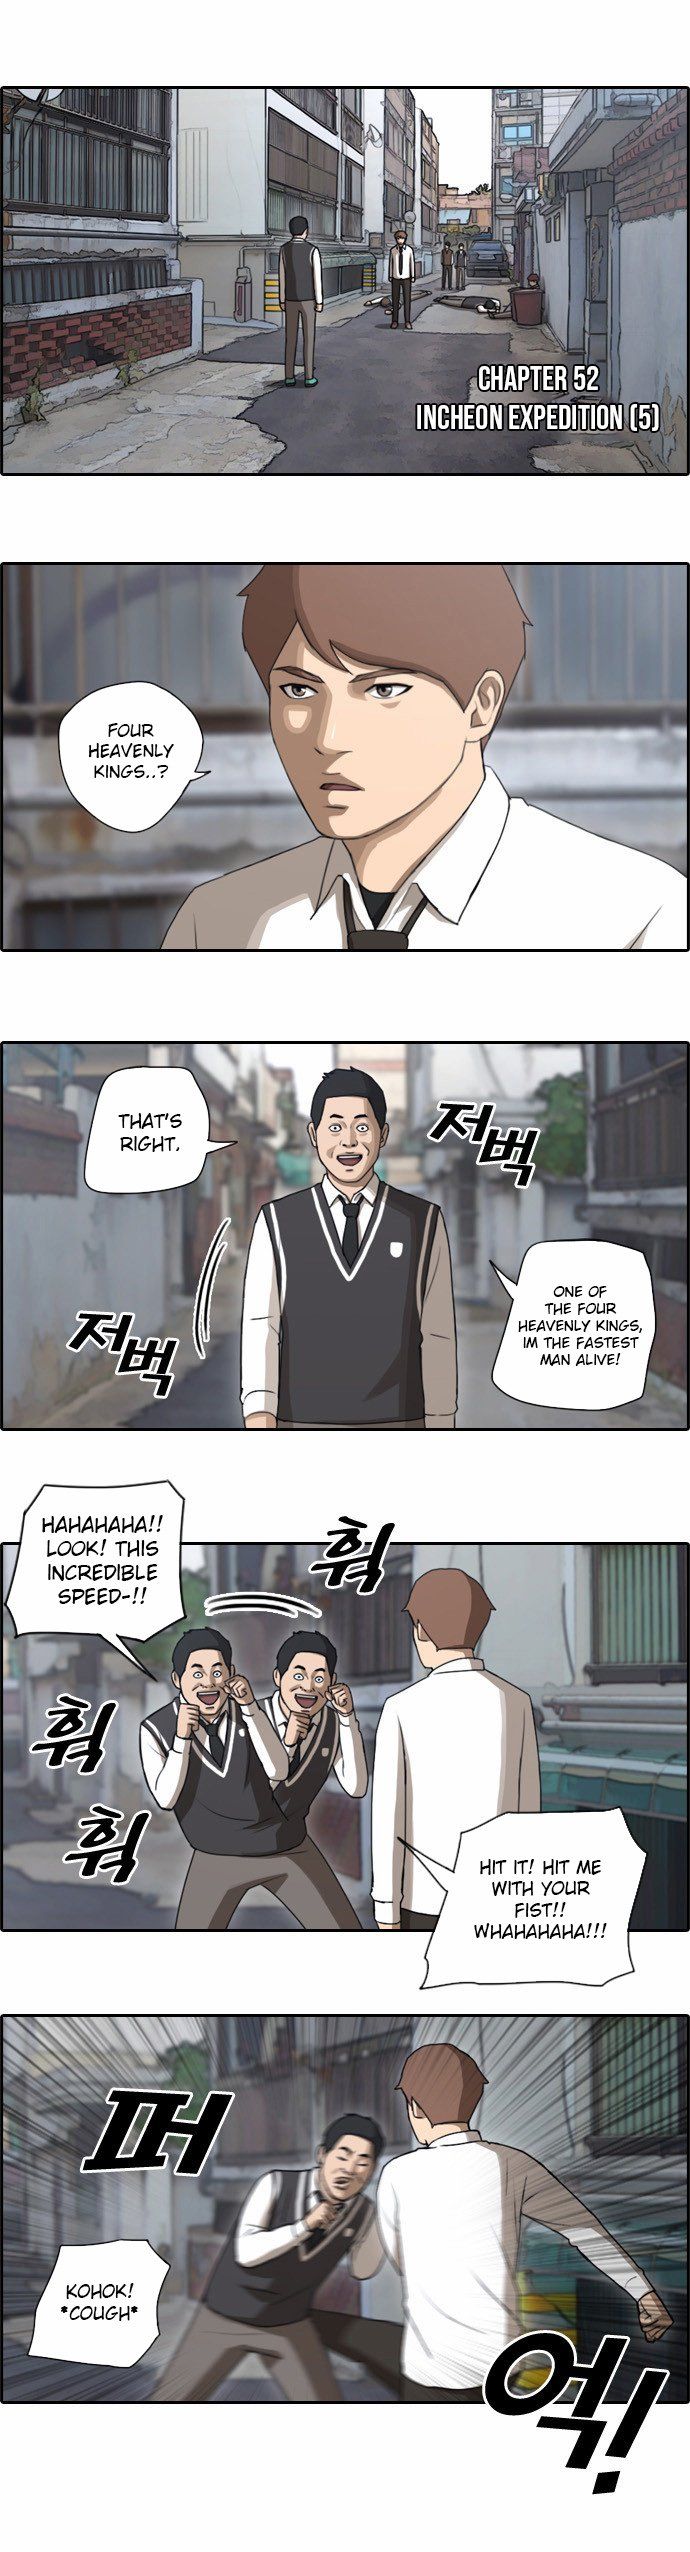 Free Throw Chapter 52 page 3